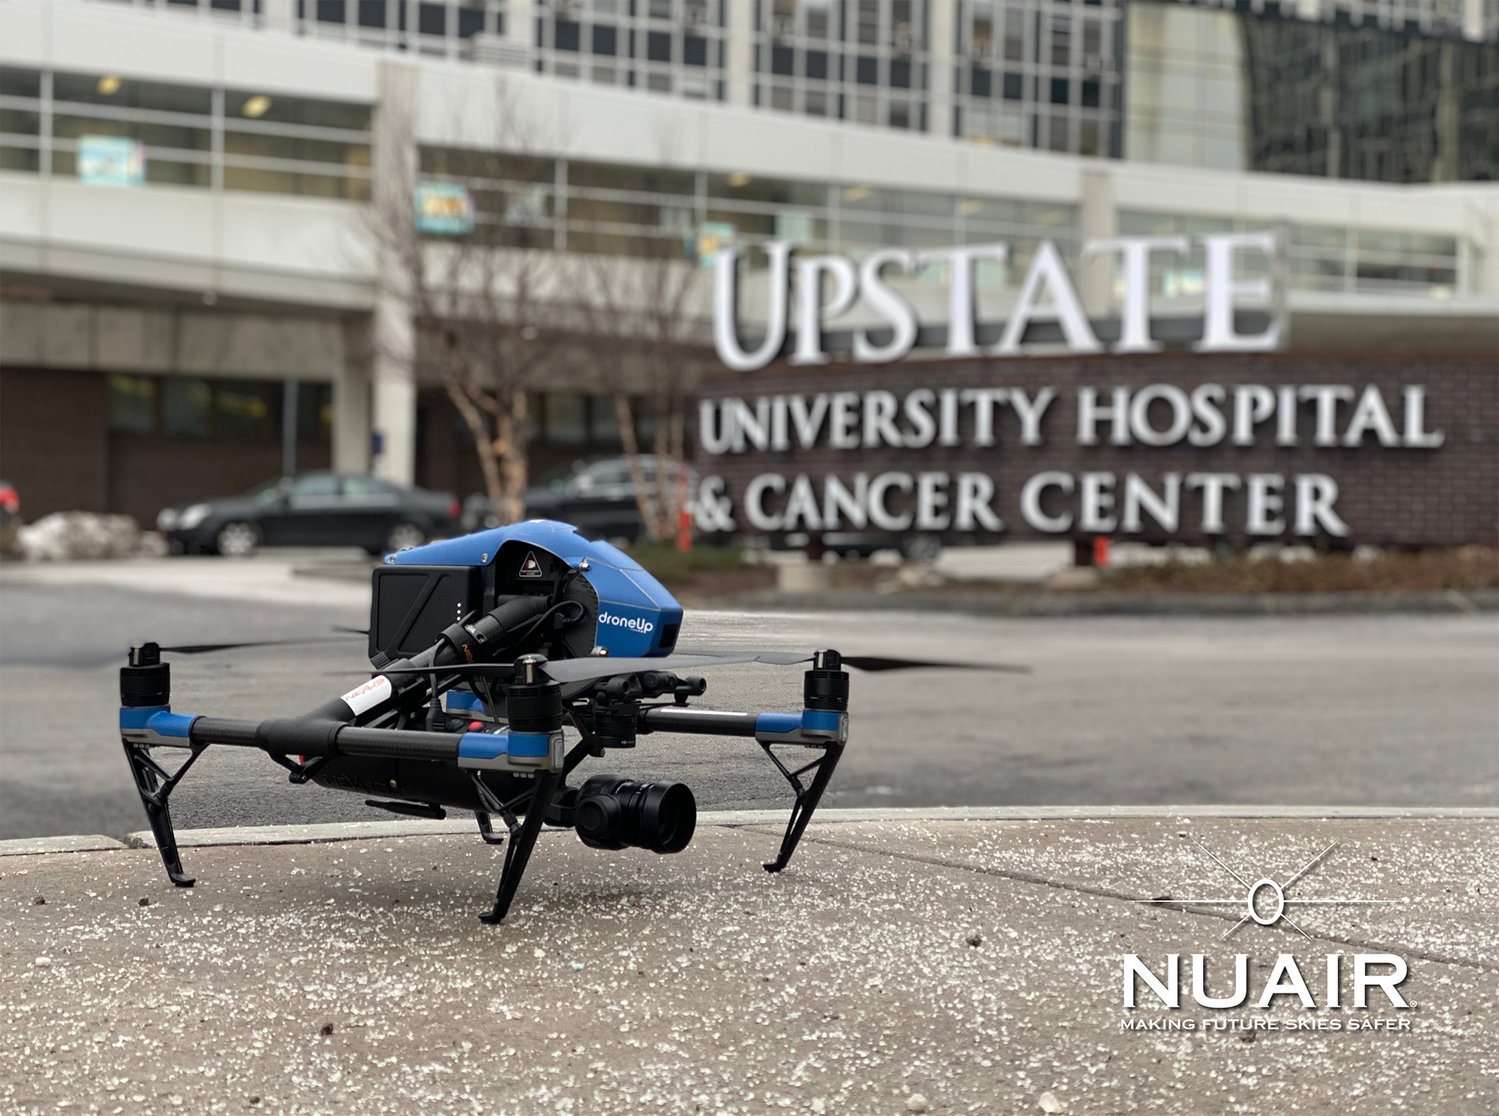 MISSION ACCOMPLISHED — An unmanned aerial system (drone) rests on the sidewalk after a successful test mission to see how the systems can aid in the ongoing fight against COVID-19. The drone performed a series of challenges in Syracuse, demonstrating ways that drones can be used to safely and quickly assist hospitals and other health care professionals.